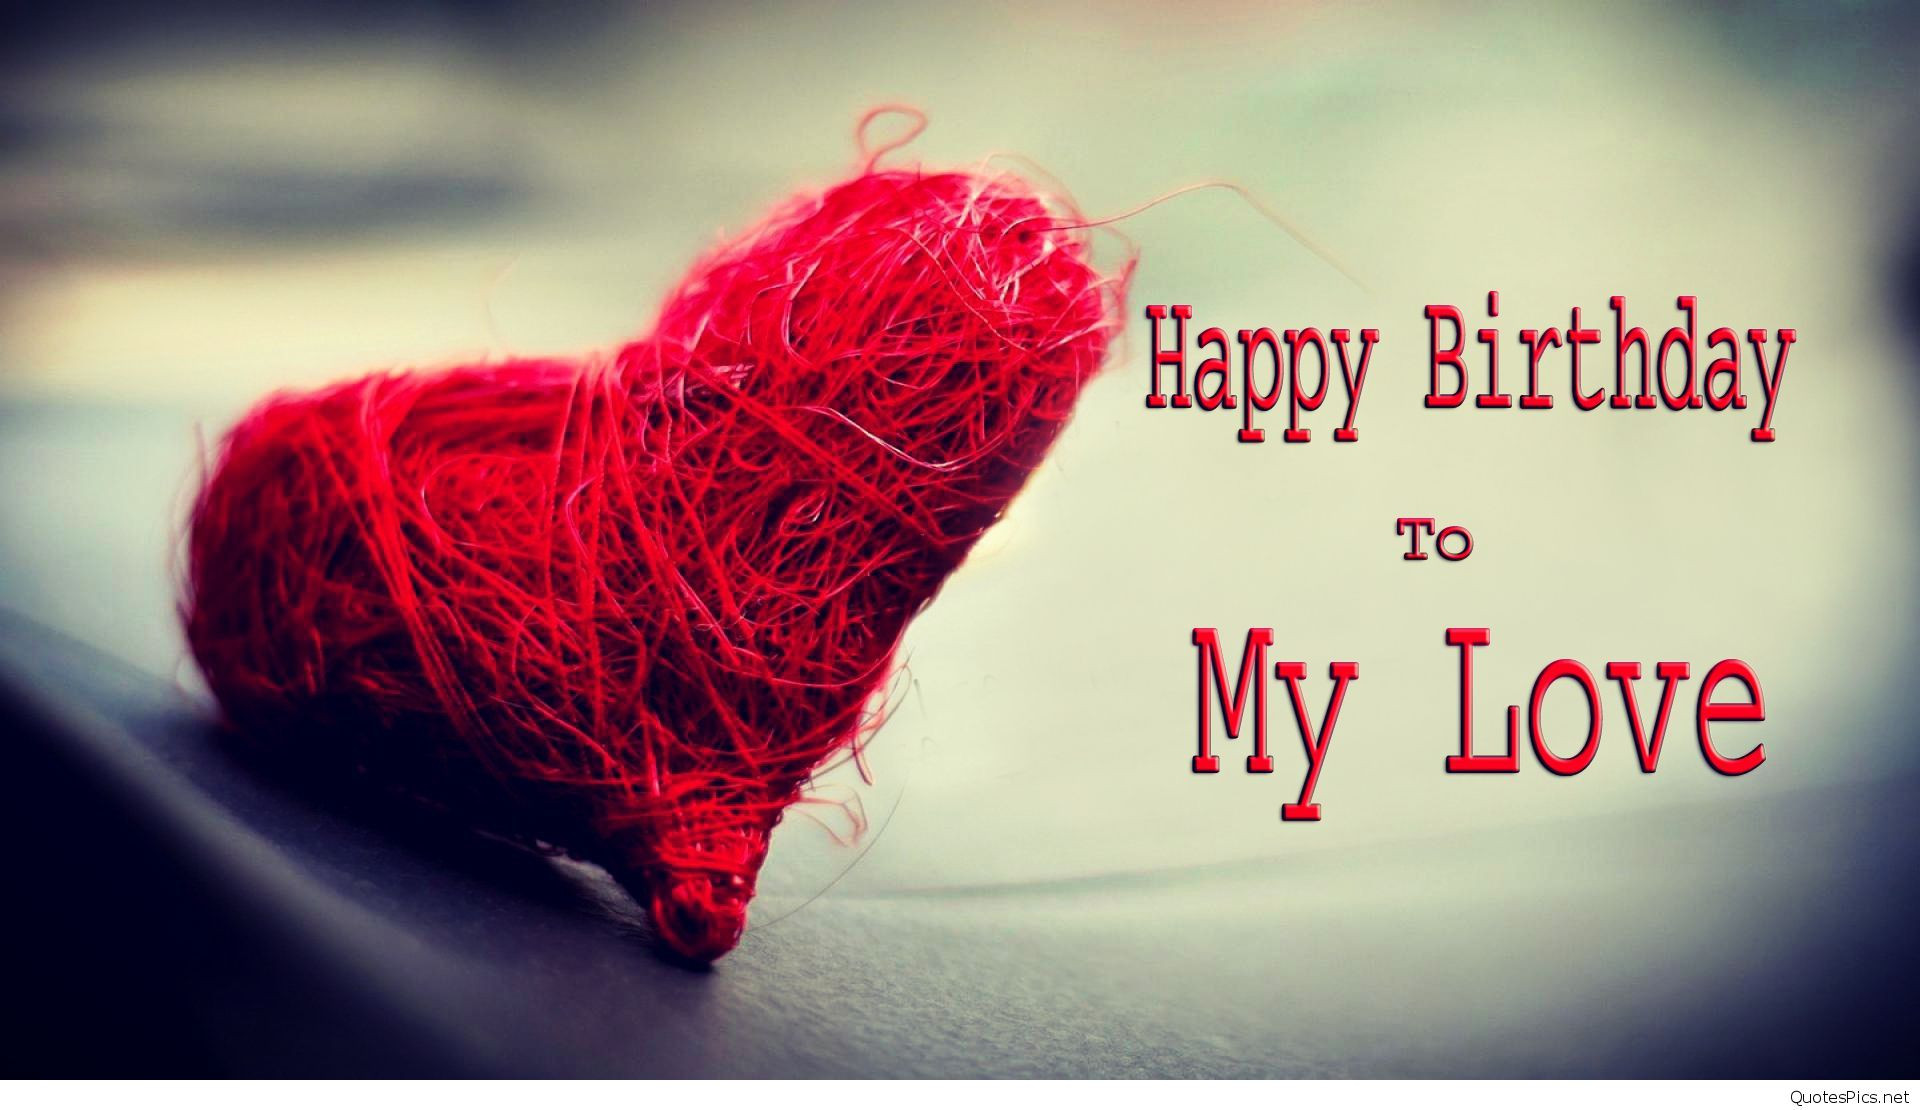 Happy Birthday Love Quotes For Her
 Love happy birthday wishes cards sayings